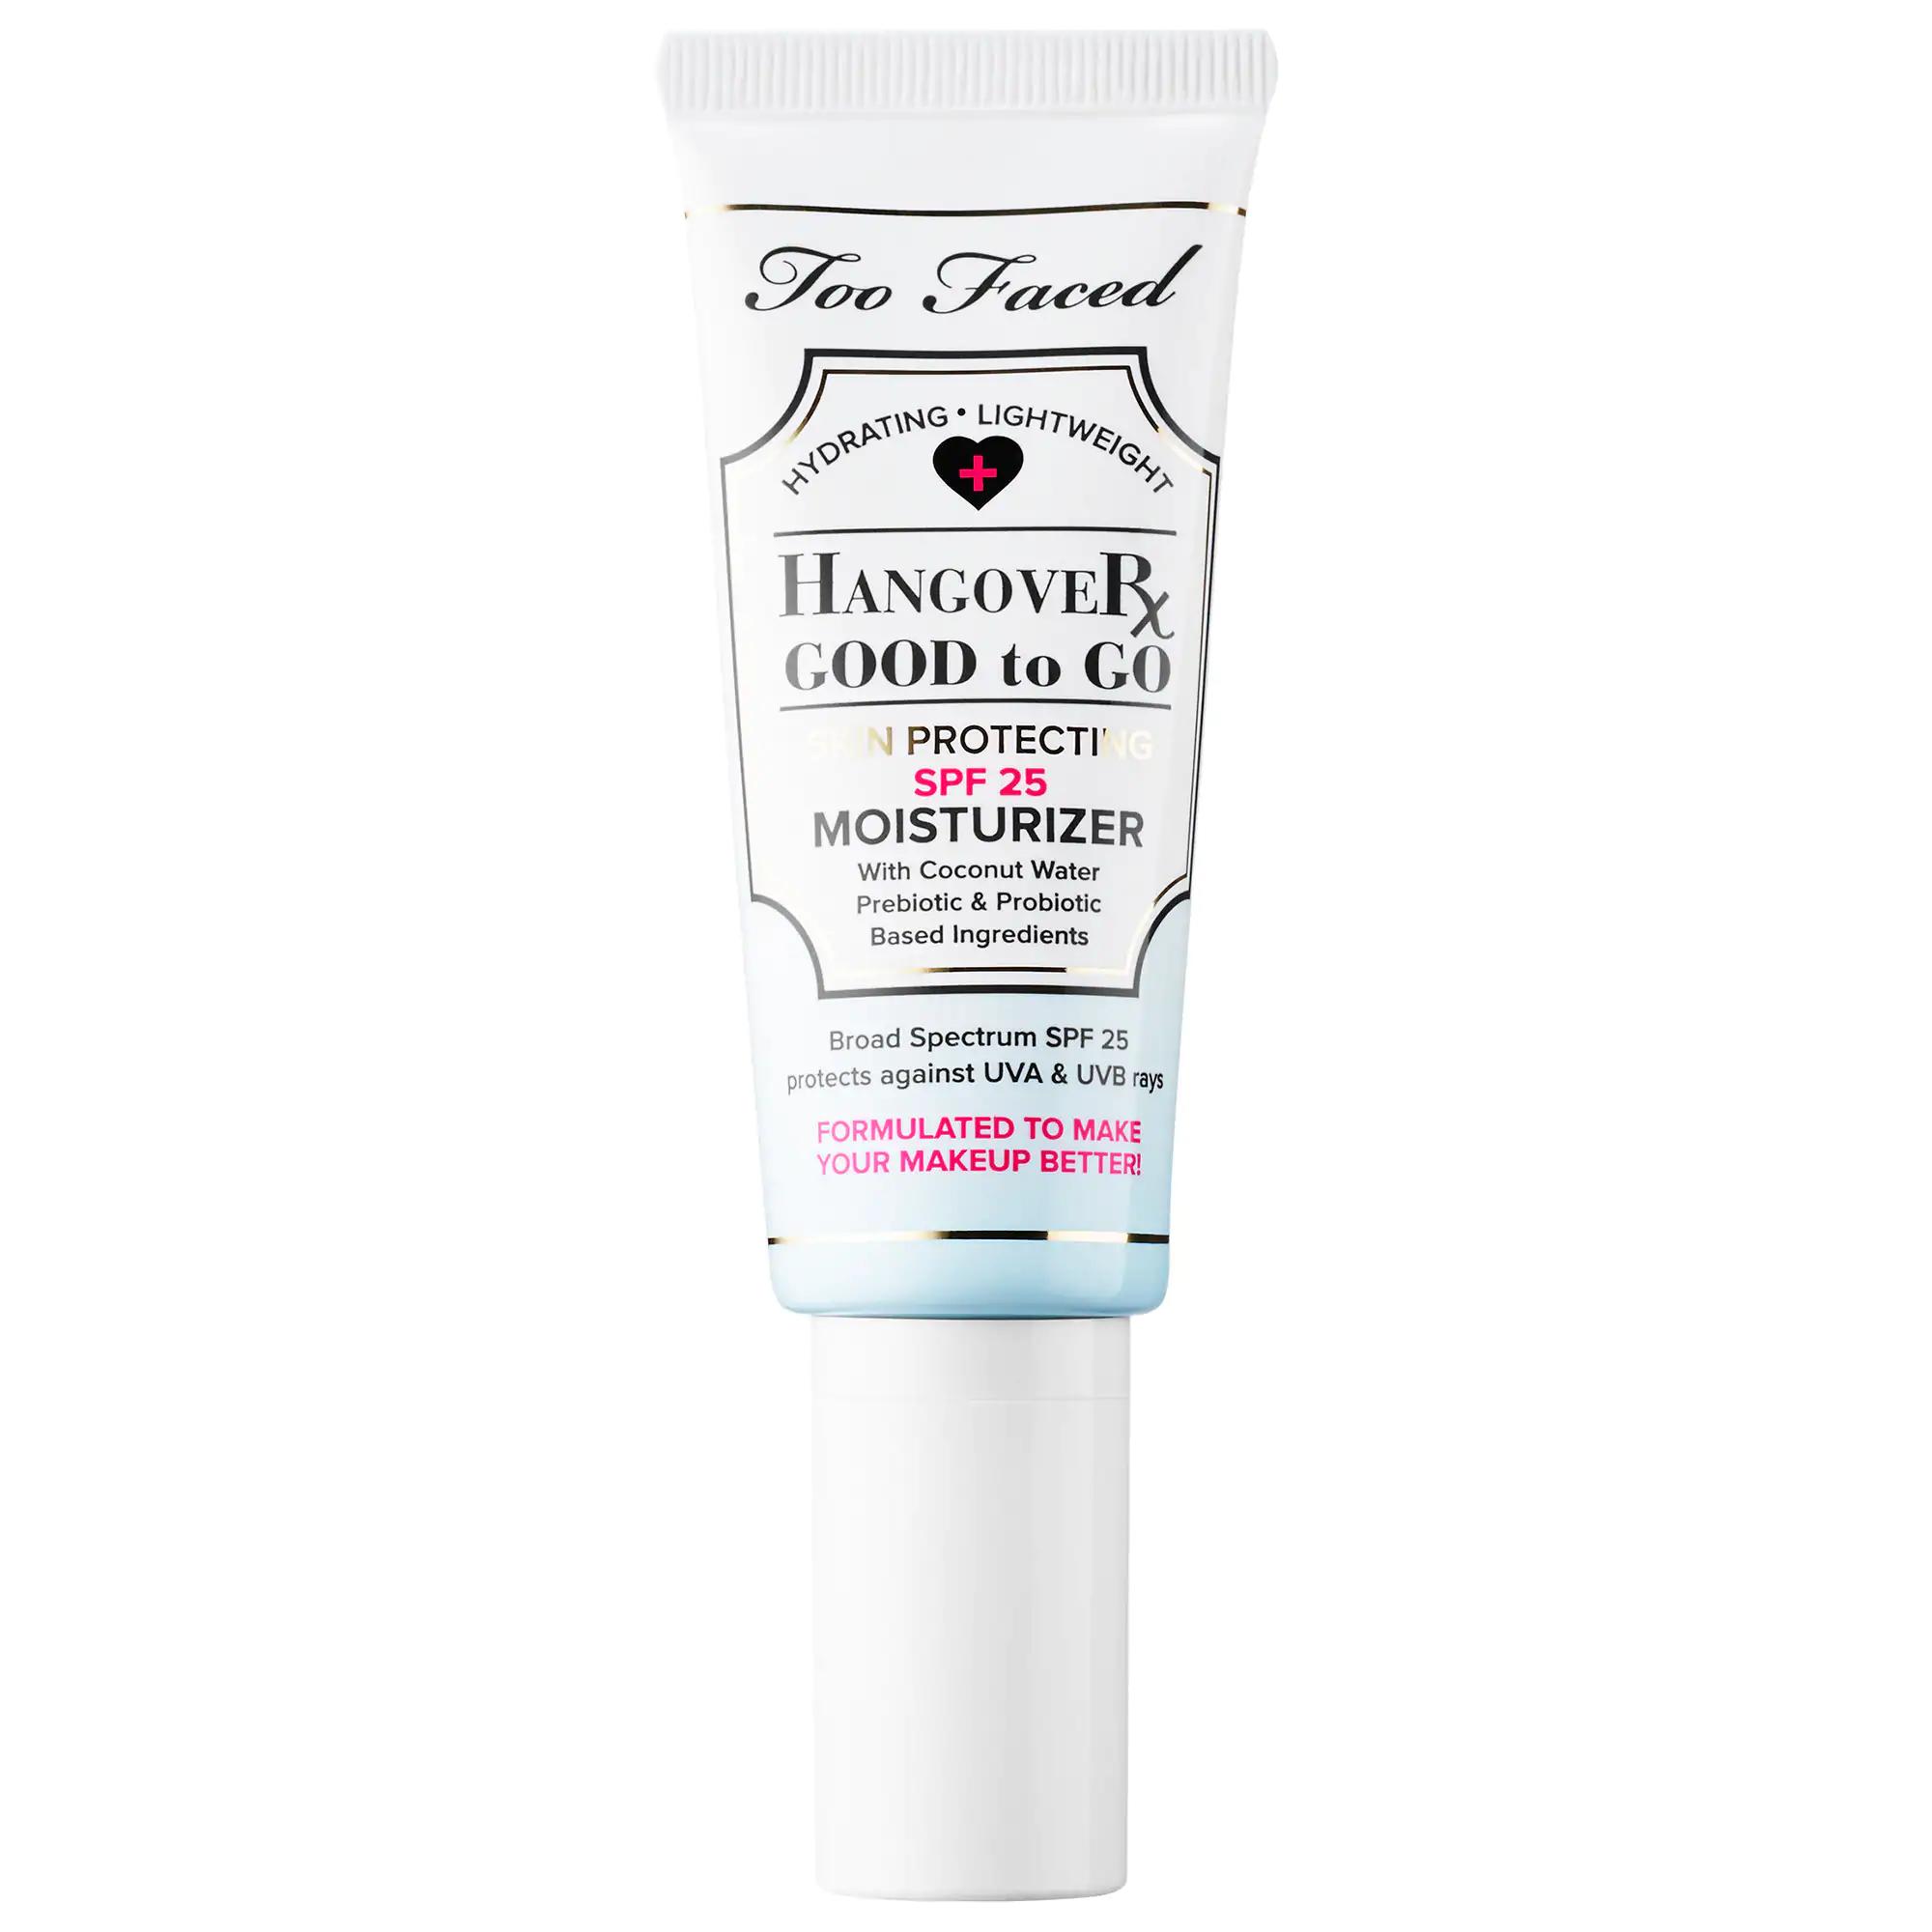 Too Faced Hangover Good To Go Skin Protecting Moisturizer